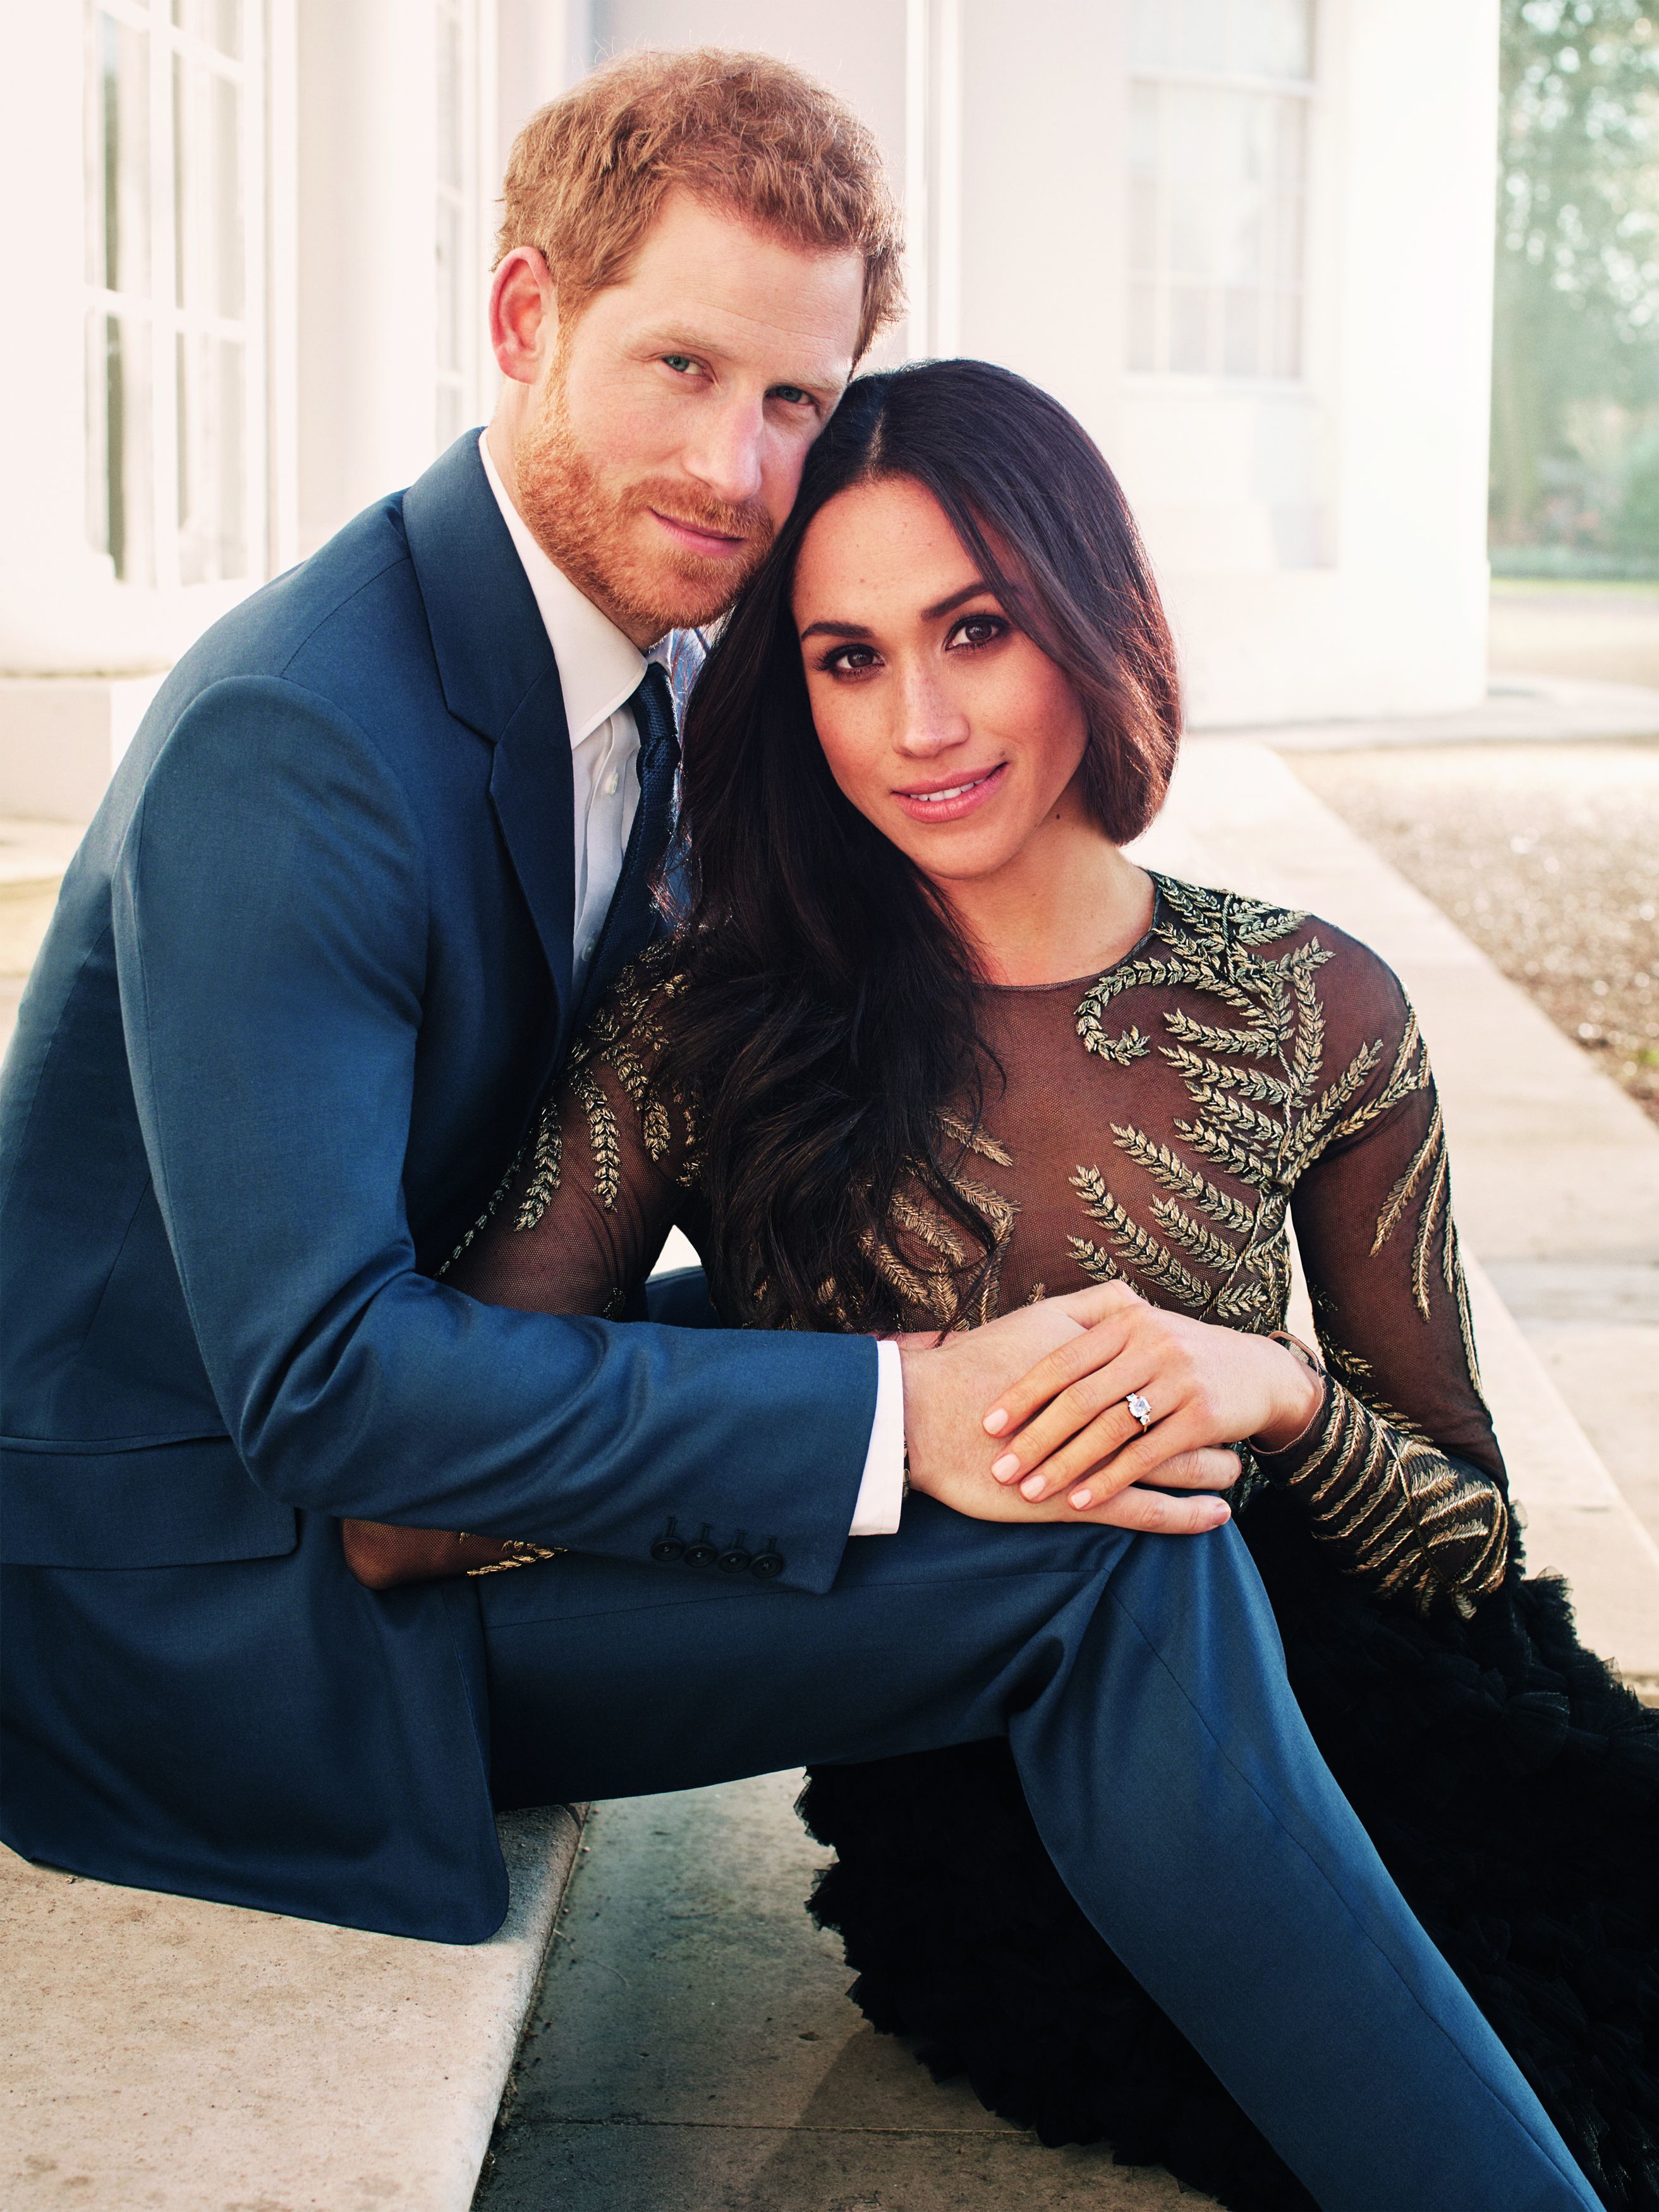 <p>After announcing <a href="https://www.wonderwall.com/celebrity/photos/meghan-markle-prince-harry-are-engaged-see-all-photos-announcement-3010846.gallery">their engagement</a> in November 2017, <a href="https://www.wonderwall.com/celebrity/profiles/overview/prince-harry-481.article">Prince Harry</a> and Meghan Markle revealed they were <a href="https://www.wonderwall.com/celebrity/couples/timeline-meghan-markle-and-prince-harrys-whirlwind-romance-3007739.gallery?photoId=1007151">set up by a mutual friend</a> -- they've refused to name her but it's believed to be Violet von Westenholz, a member of Harry's friend circle who reportedly met Meghan though her work doing public relations for Ralph Lauren -- in London in July 2016. "We met once and then twice -- back-to-back, two dates," he told the BBC. "And then it was I think about three, maybe four weeks later that I managed to persuade her to come and join me in Botswana. And we camped out with each other under the stars... she came and joined me for five days out there, which was absolutely fantastic. So then we were really by ourselves. Which I think... was crucial to me to make sure we had a chance to get to know each other." Meghan said that though she knew who Harry was, of course, she didn't know much about him. "The only thing that I had asked her when she said that she wanted to set us up, was... 'Well is he nice?' [We] met for a drink and then I think very quickly into that we said, 'Well, what are we doing tomorrow? We should meet again.'" Harry wasn't familiar with Meghan's acting work when they were introduced. "I'd never watched 'Suits,' I'd never heard of Meghan before. And I was beautifully surprised when I walked into that room and saw her. There she was, sitting there. I was like, "Okay, well, I'm really going to have to up my game!'" They <a href="https://www.wonderwall.com/celebrity/photos/prince-harry-meghan-markle-married-royal-wedding-england-all-best-photos-3014346.gallery">married</a> in May 2018.</p>